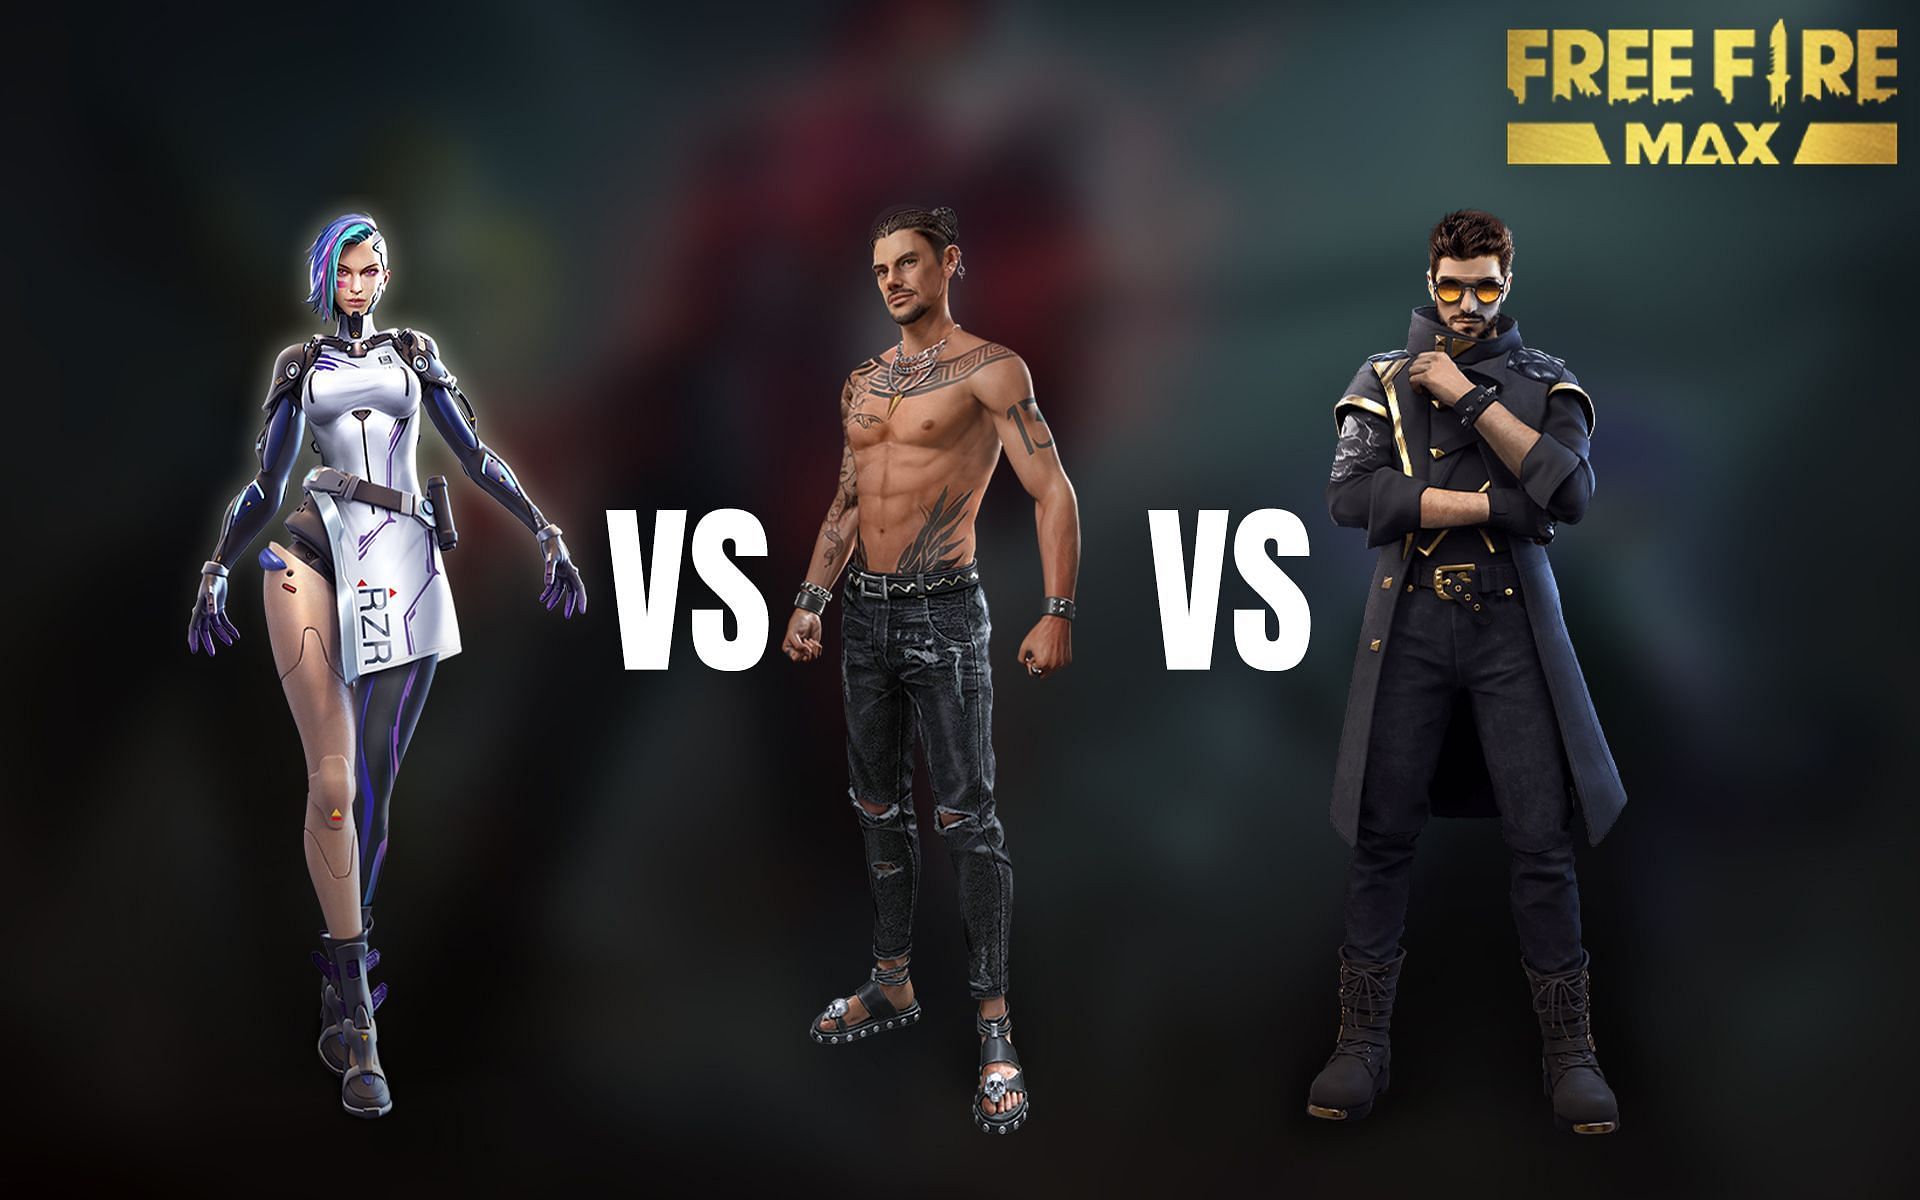 Choosing a good character as a beginner in Free Fire MAX will make a lot of difference (Image via Sportskeeda)